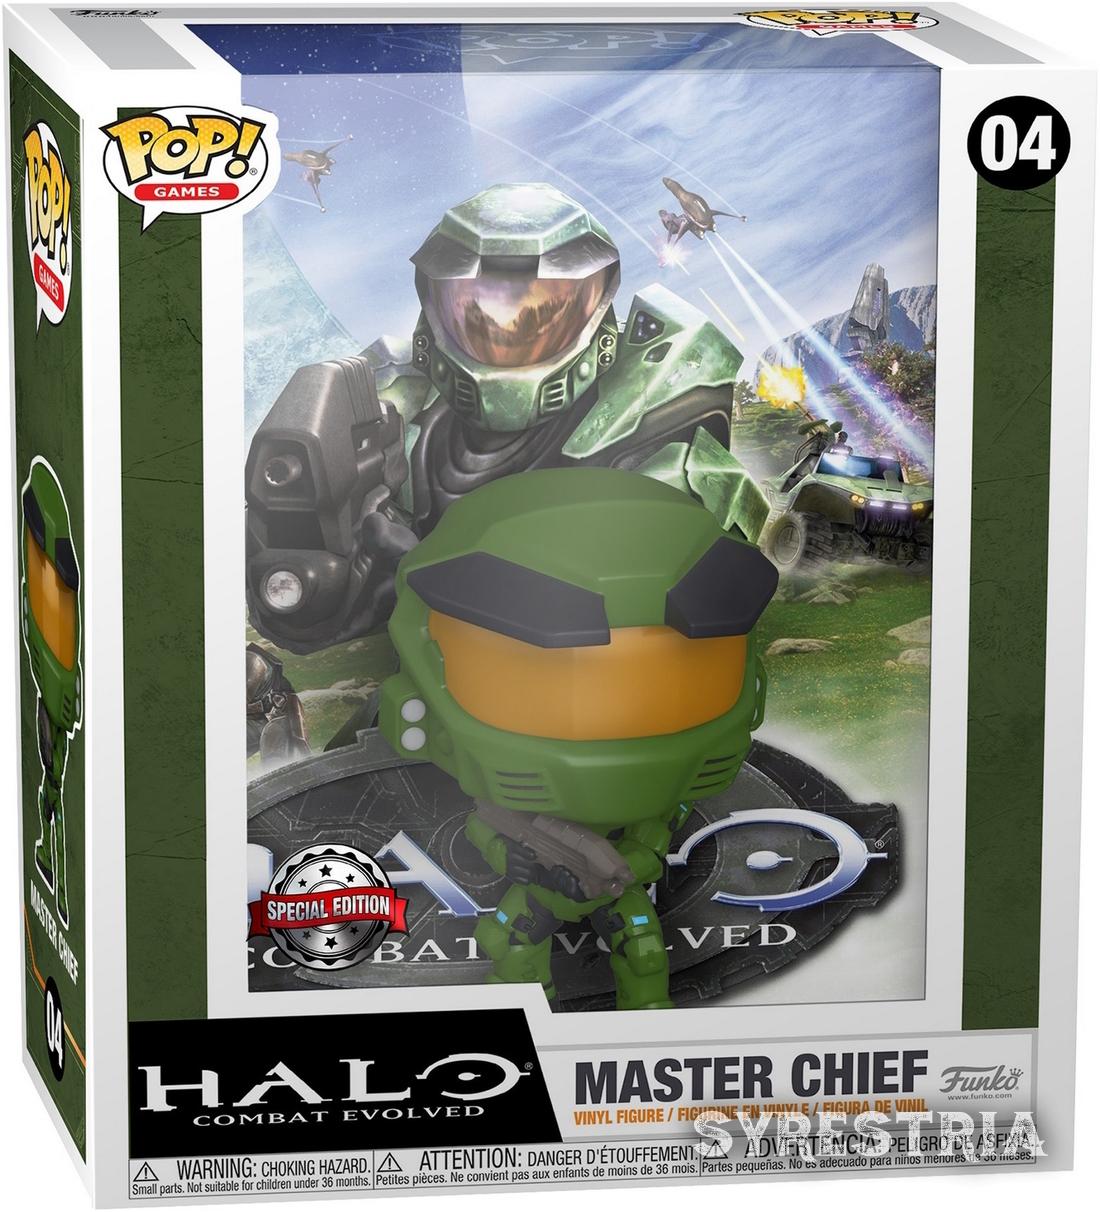 HALO Combat Evolved - Master Chief 04 Special Edition - Funko Pop! Games Covers